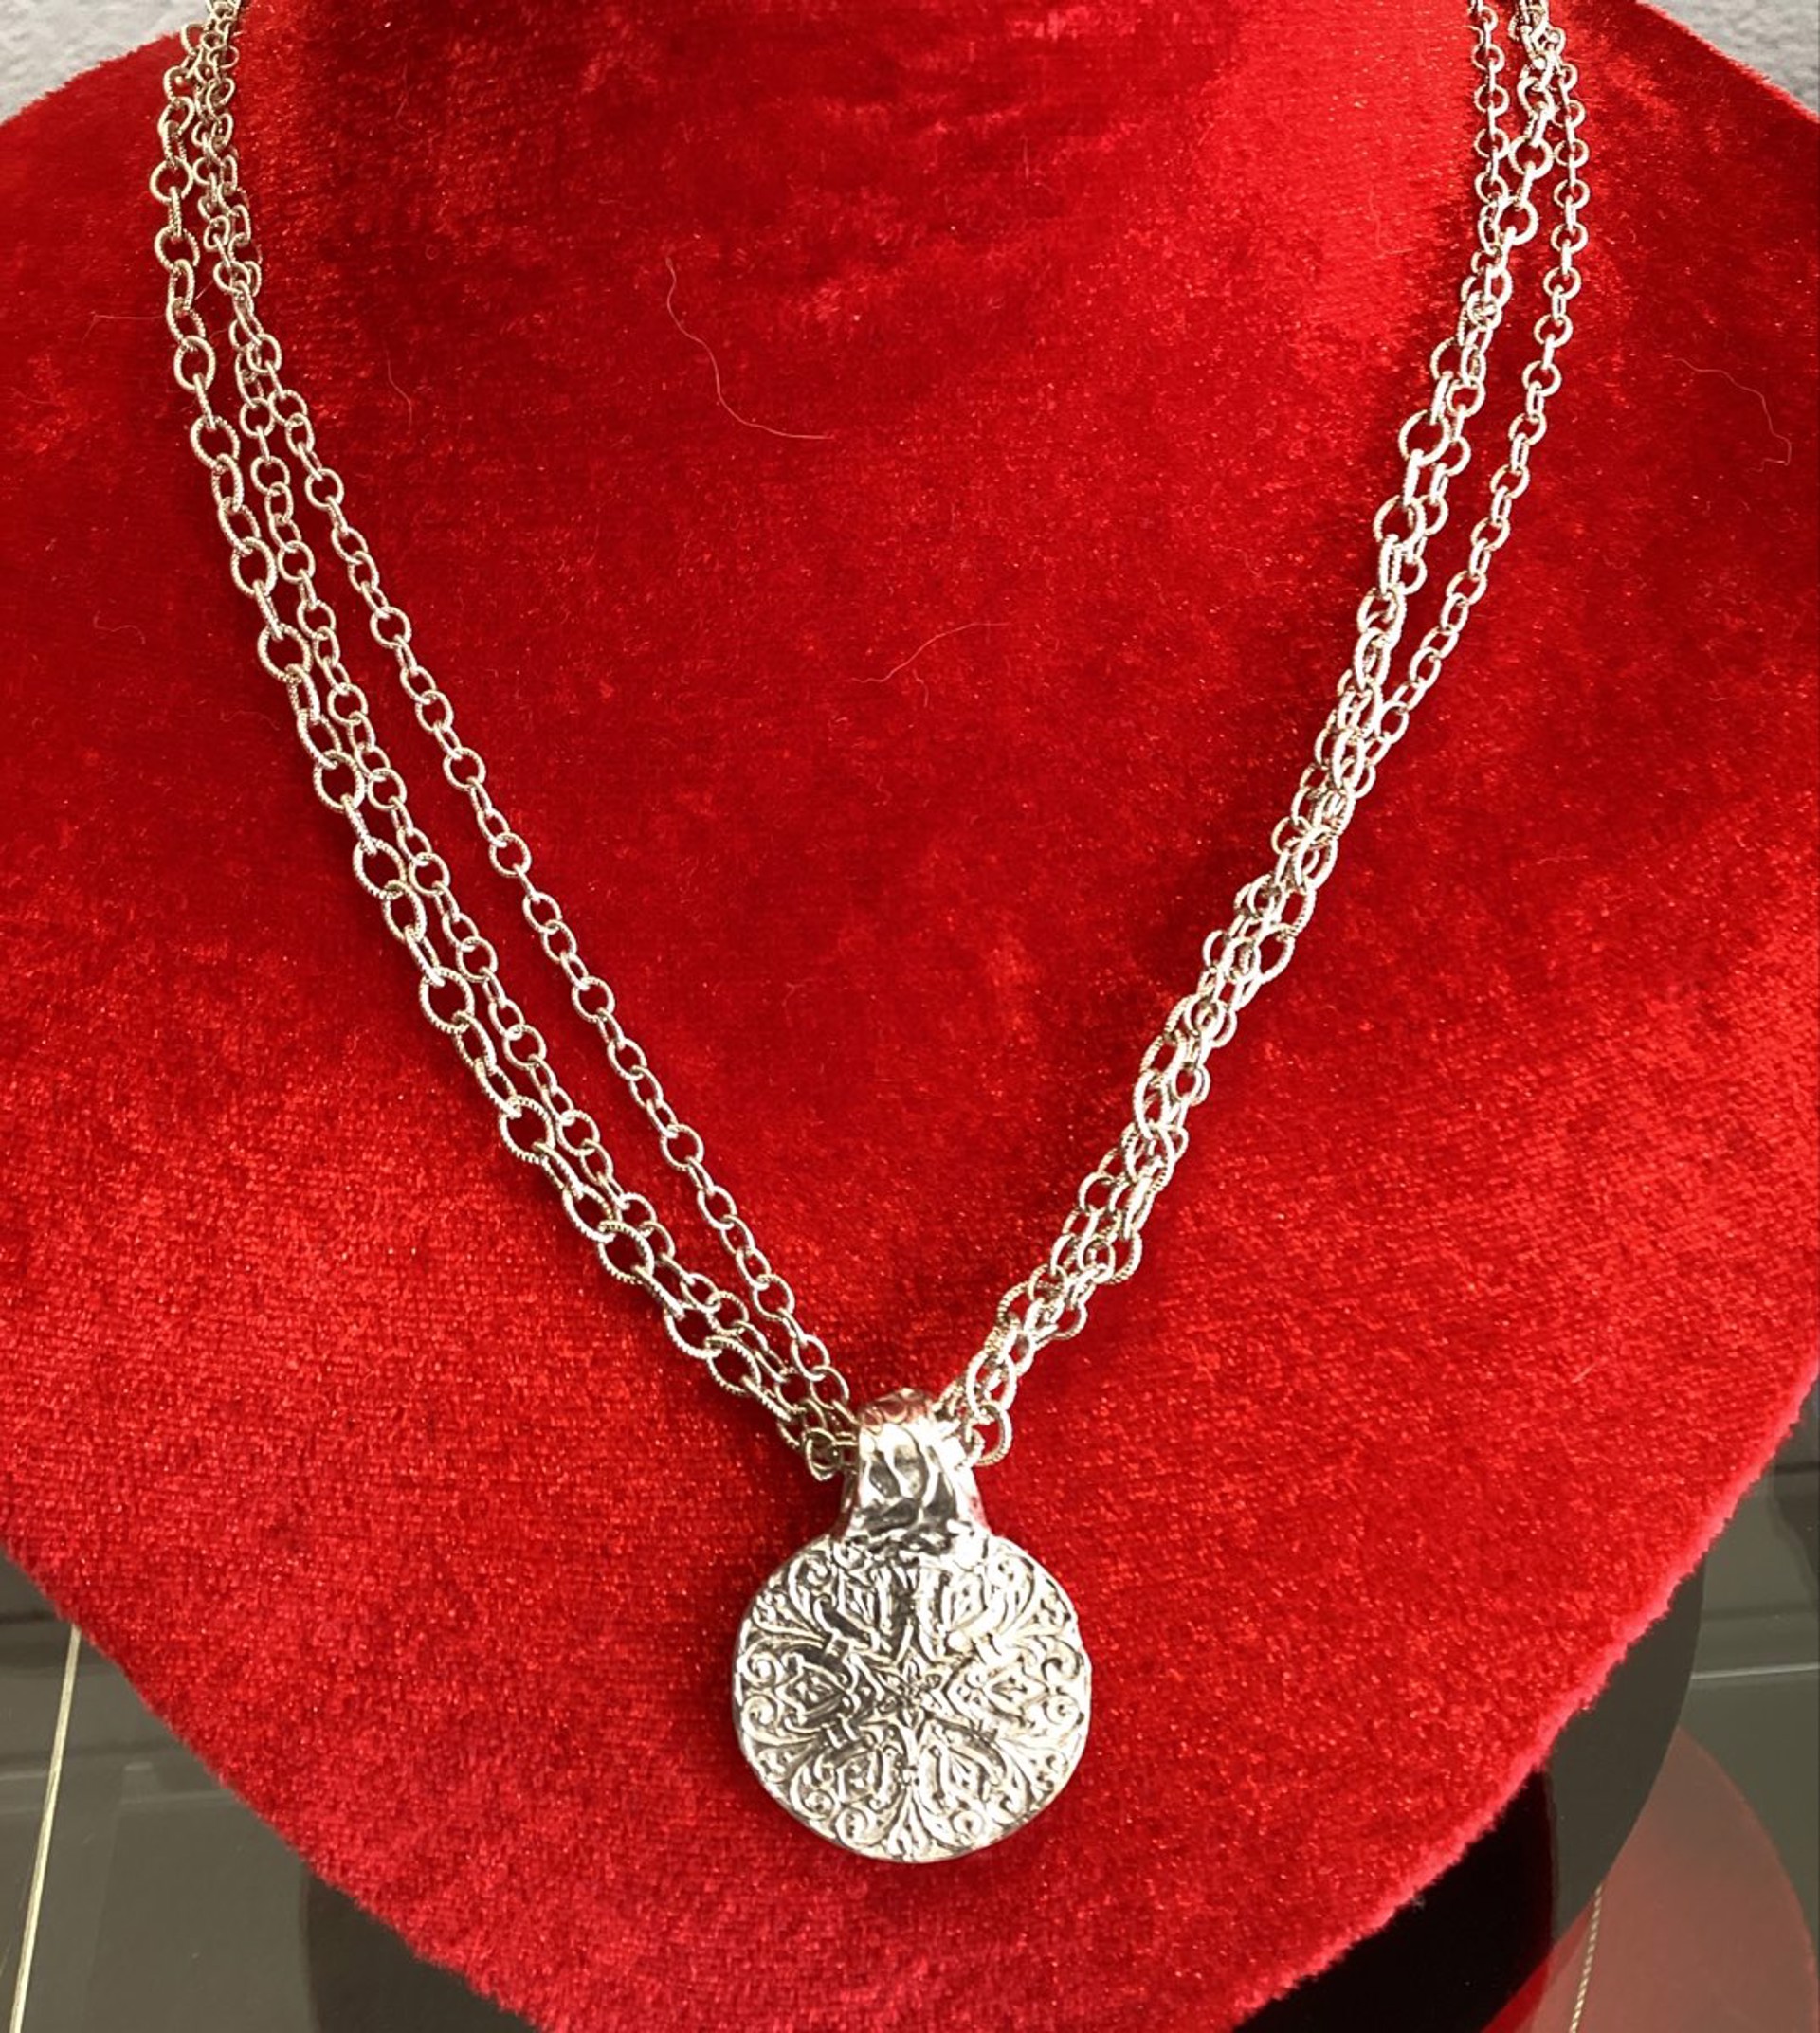 Pure Silver Round Star Pendant And Bail W/Three 22in Diamond Cut Chains And Heart-Shaped Lobster Claw Clasp by Mauzey